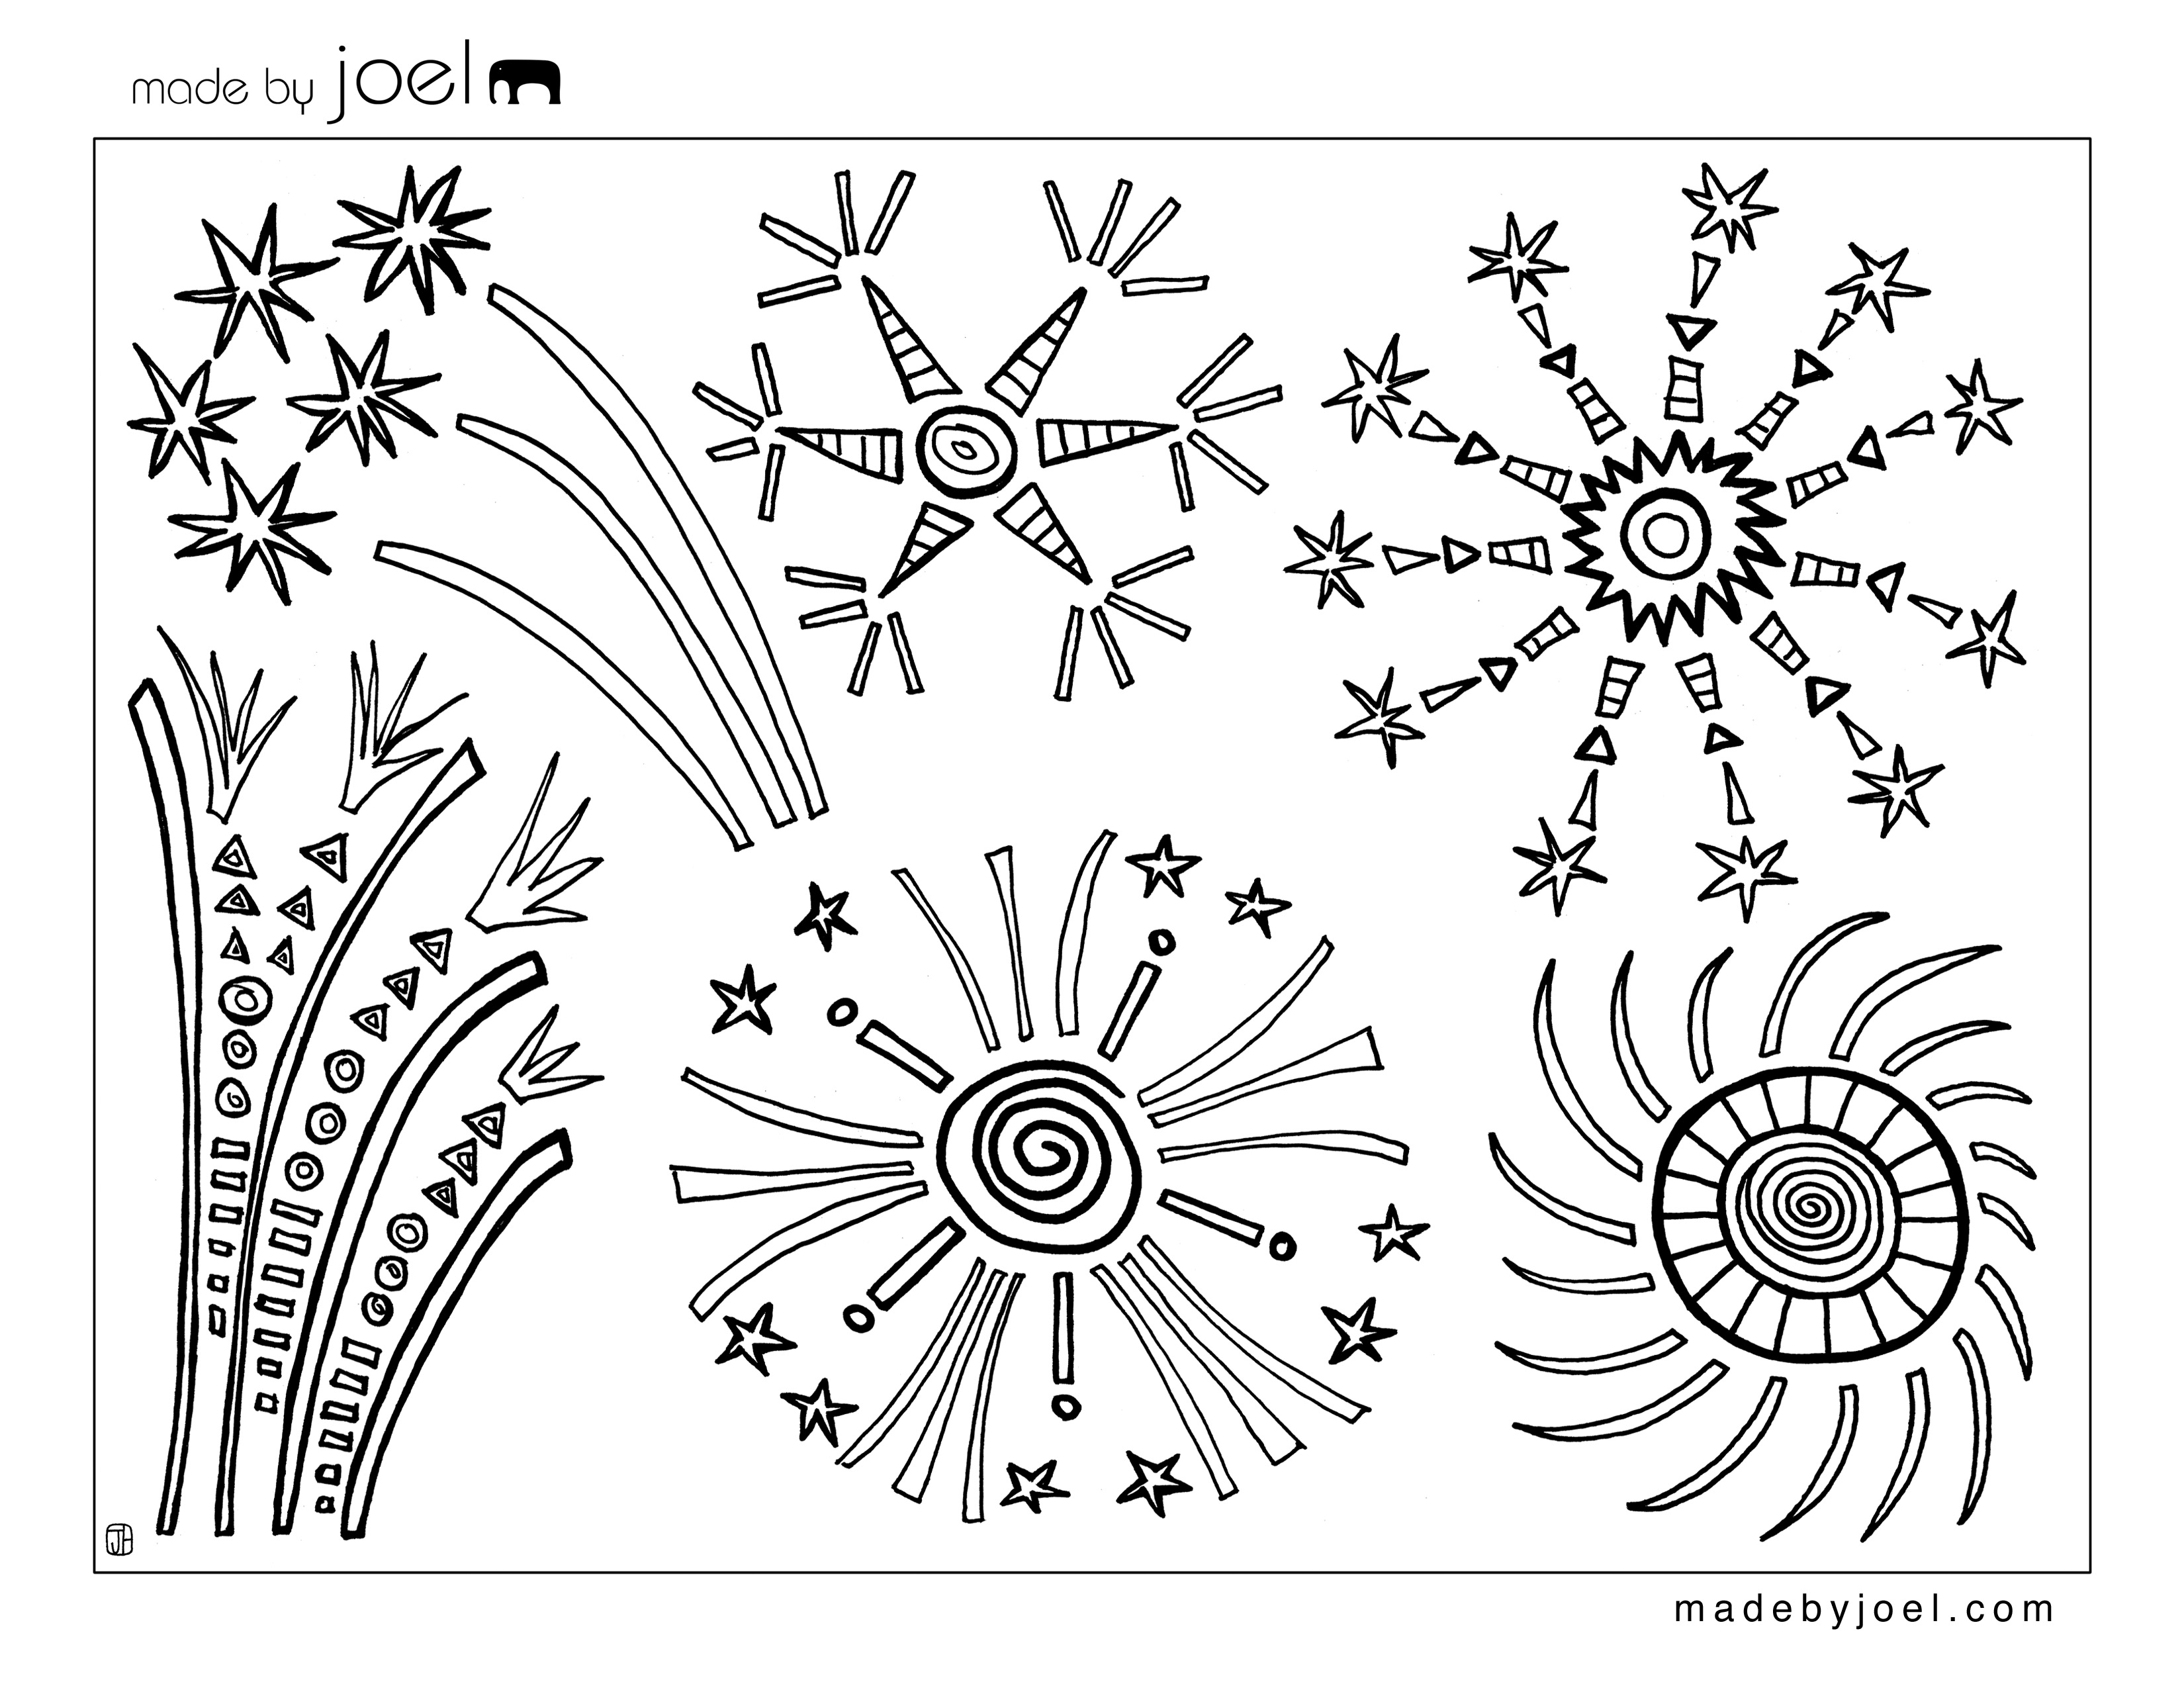 https://madebyjoel.com/wp-content/uploads/2011/07/Made-by-Joel-Fourth-of-July-Fireworks-Coloring-Sheet.jpg